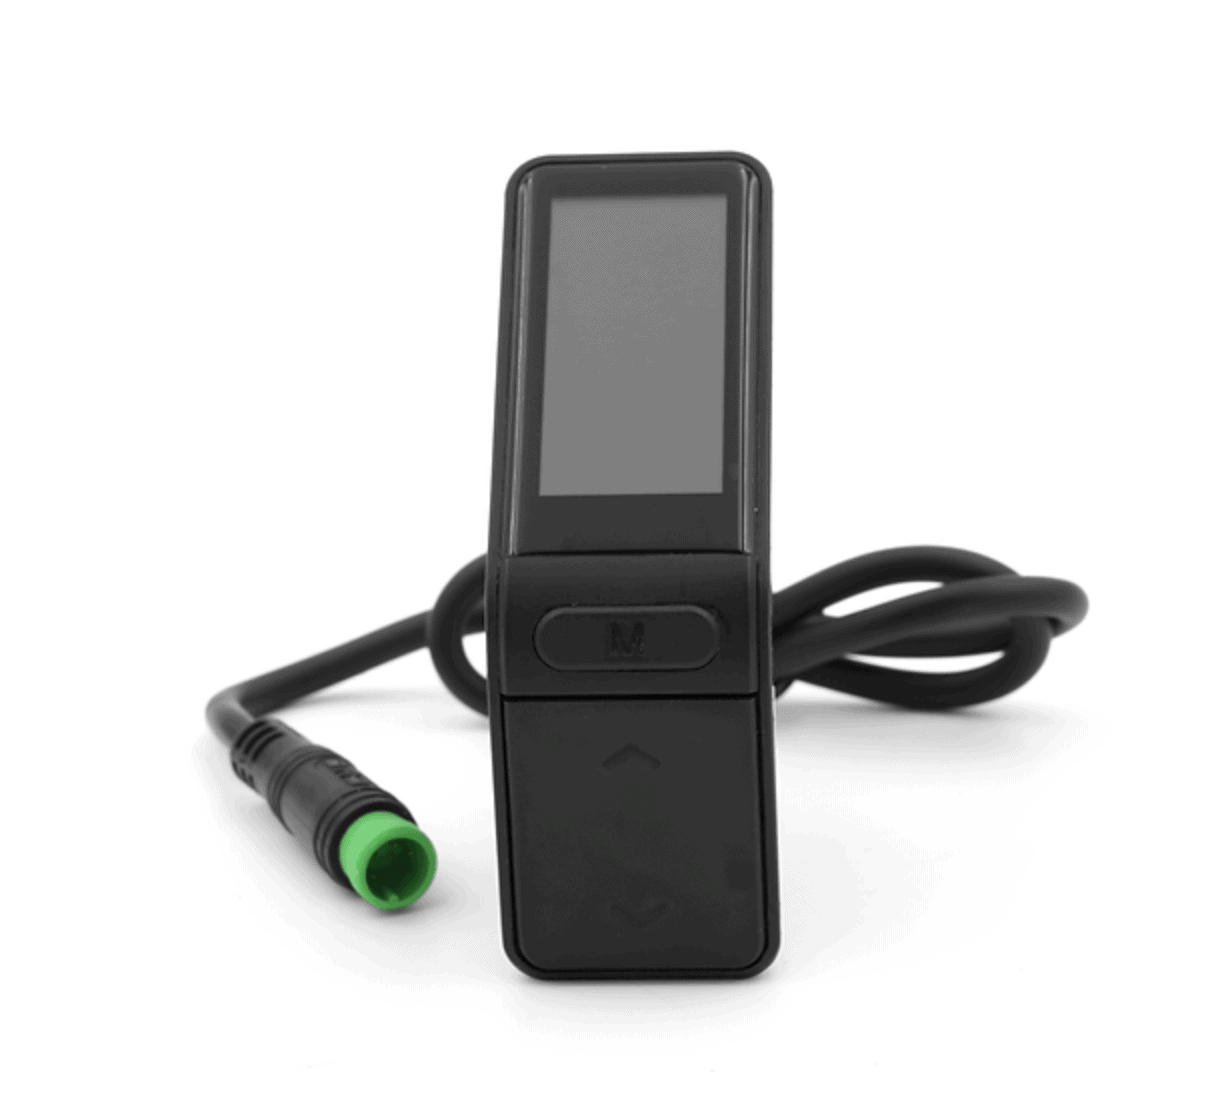 A black device with a green light on it